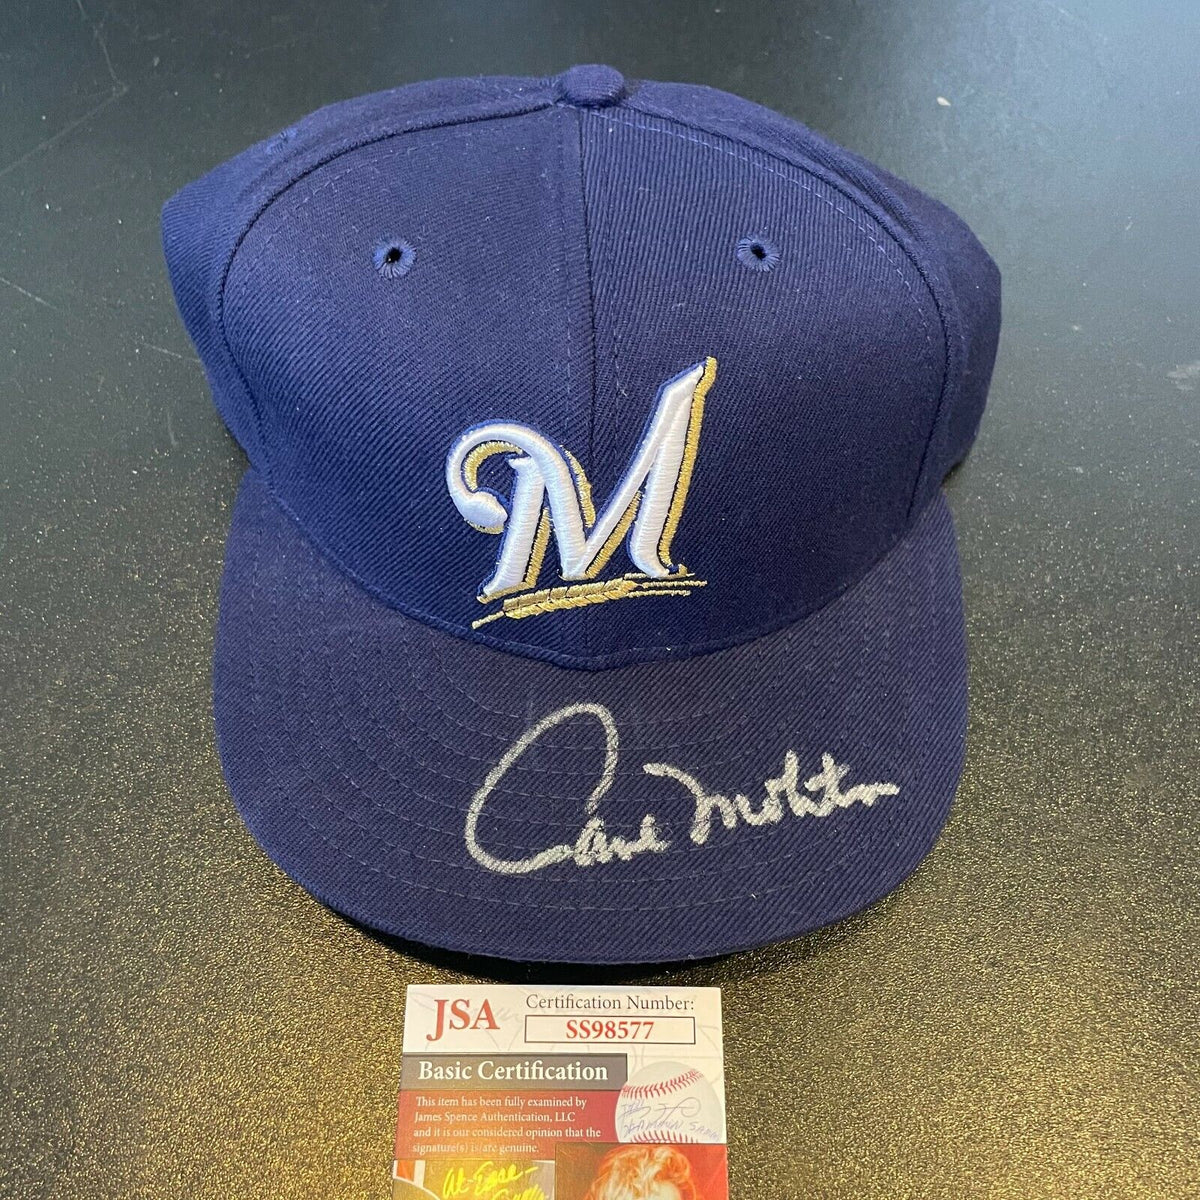 MLB Paul Molitor Signed Hats, Collectible Paul Molitor Signed Hats